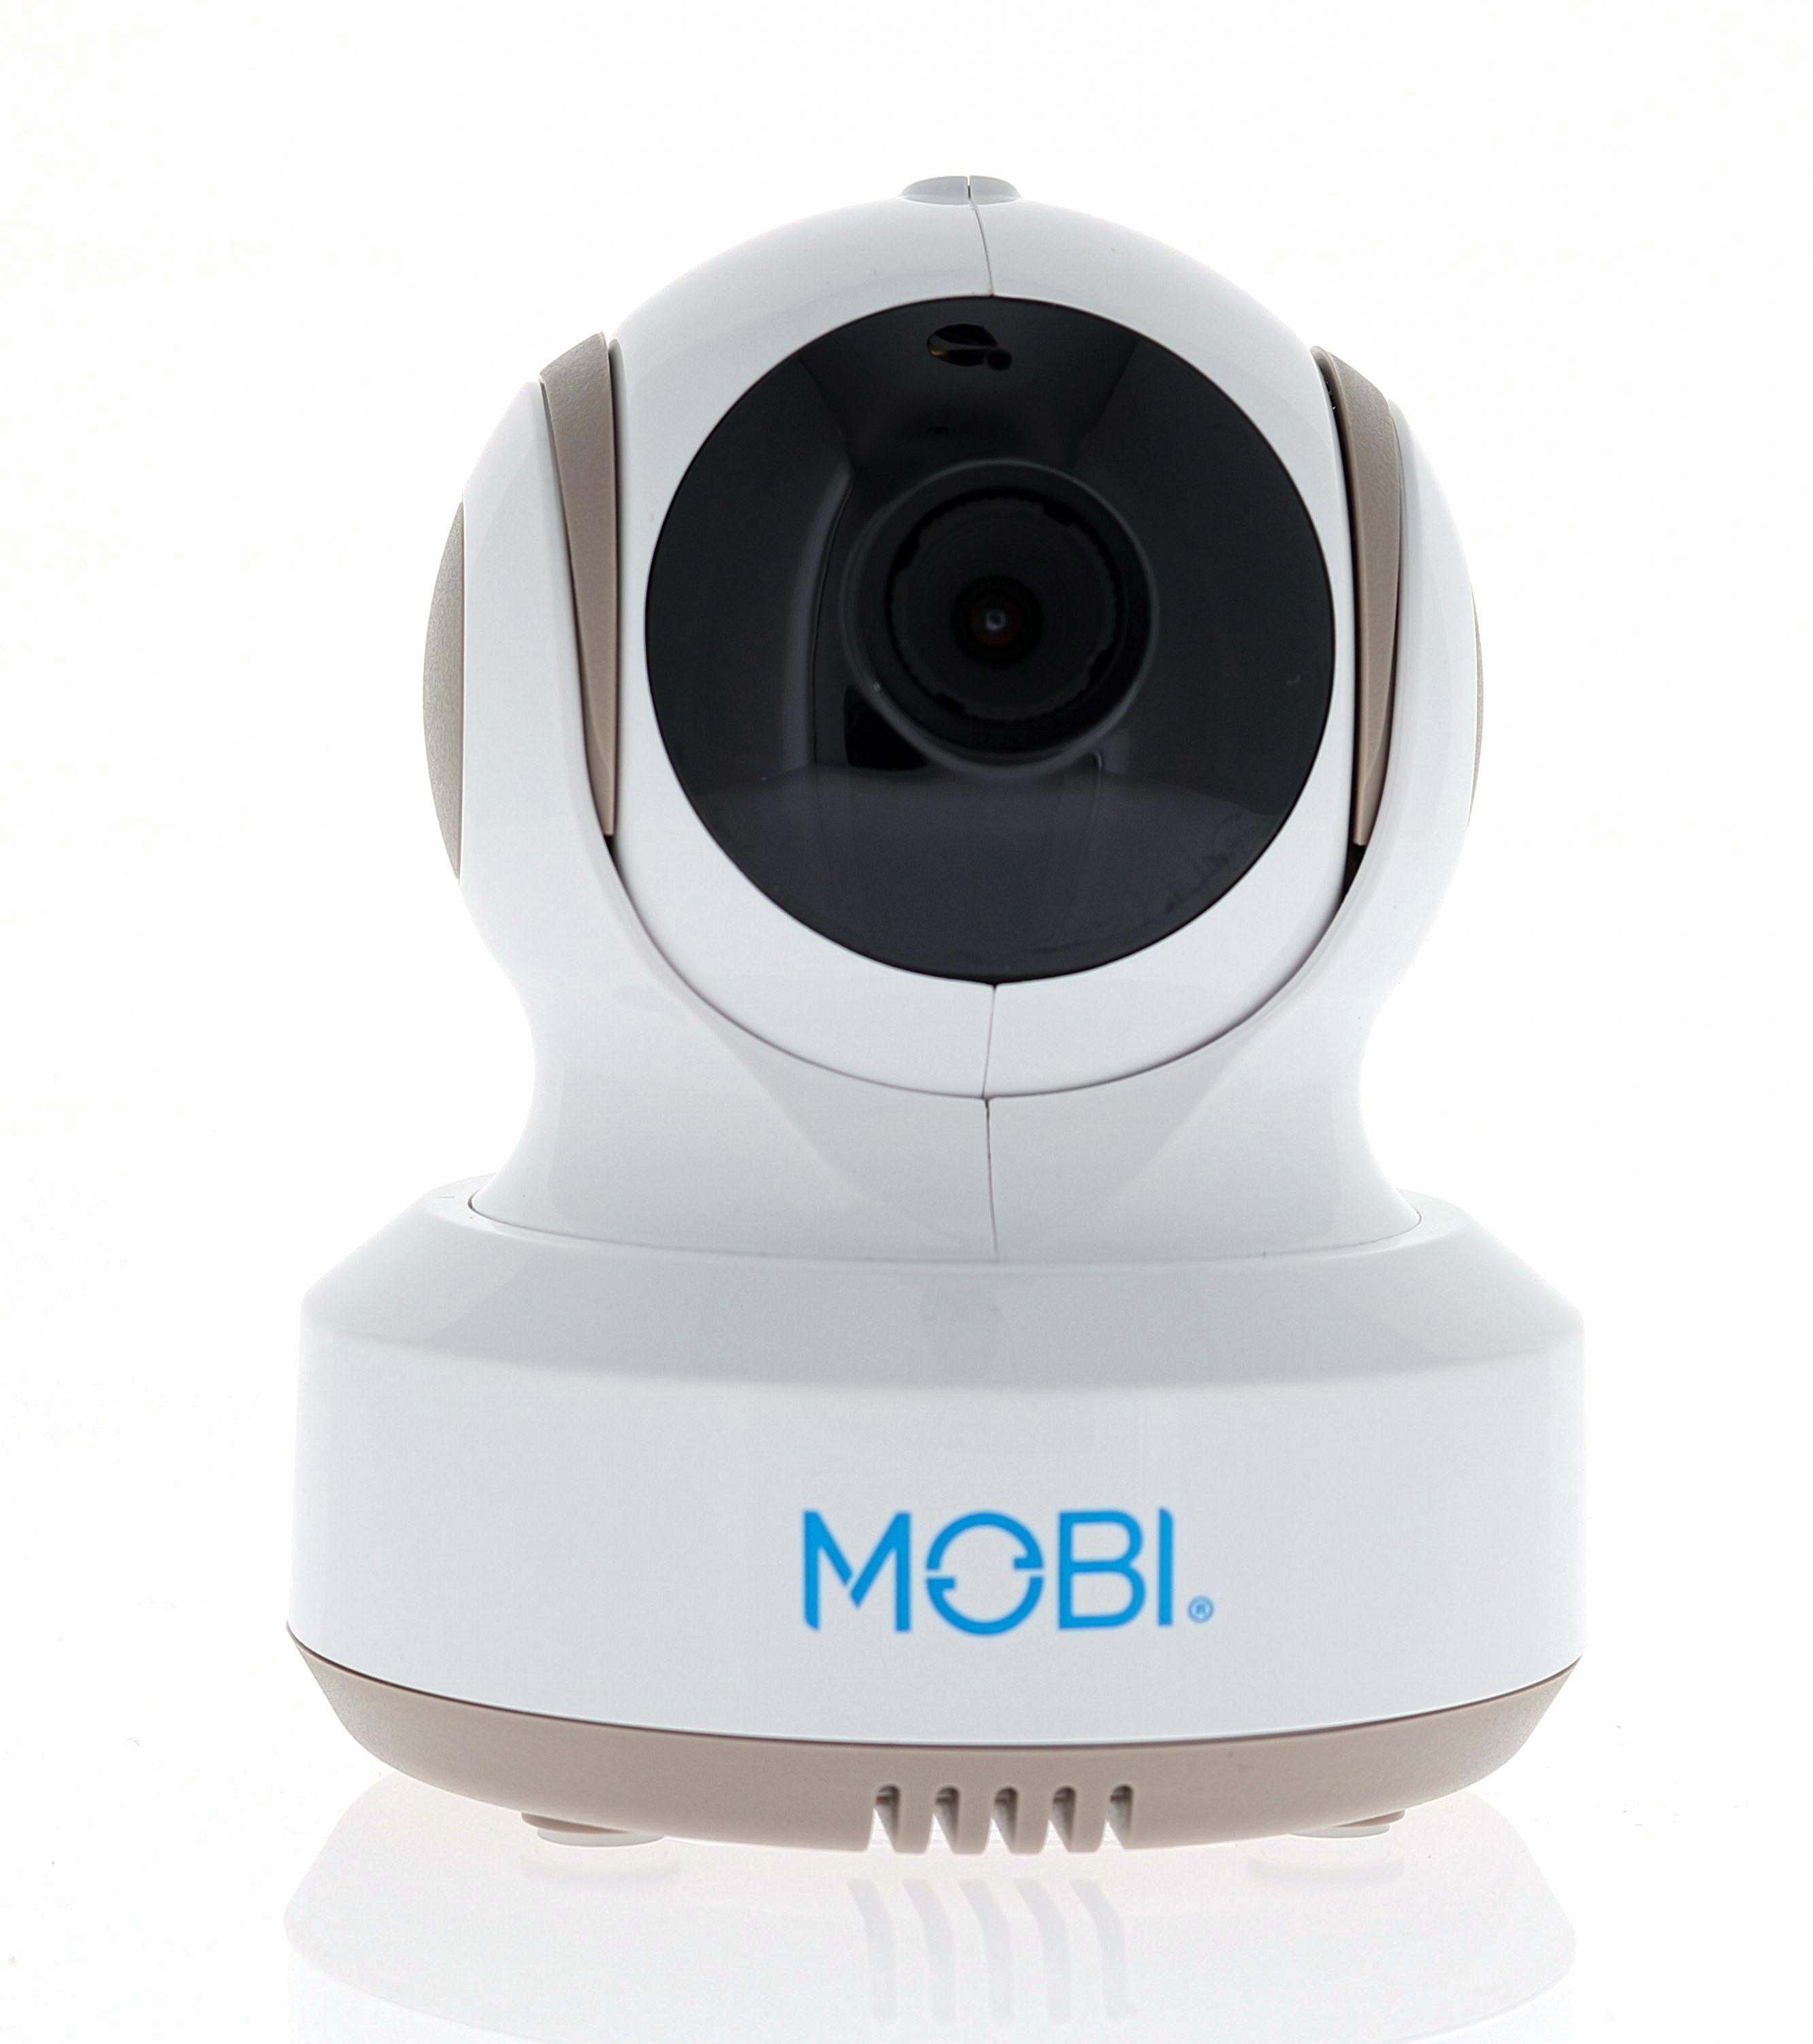 MobiCam DXR-M1 Baby Monitoring System With Smart Auto Tracking, Room Temperature, Lullabies - image 4 of 7